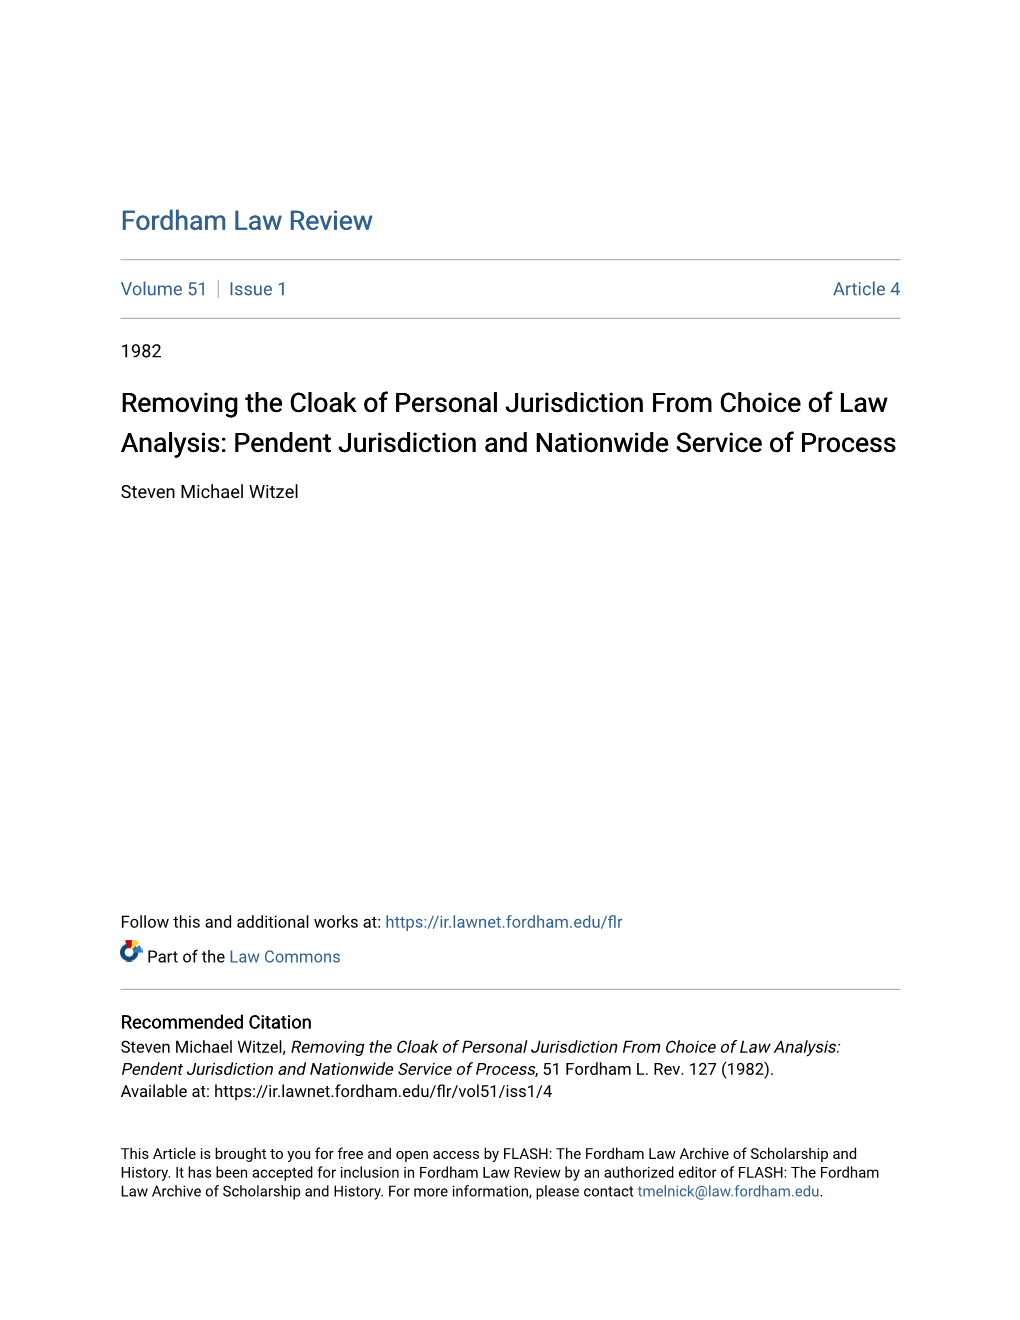 Removing the Cloak of Personal Jurisdiction from Choice of Law Analysis: Pendent Jurisdiction and Nationwide Service of Process